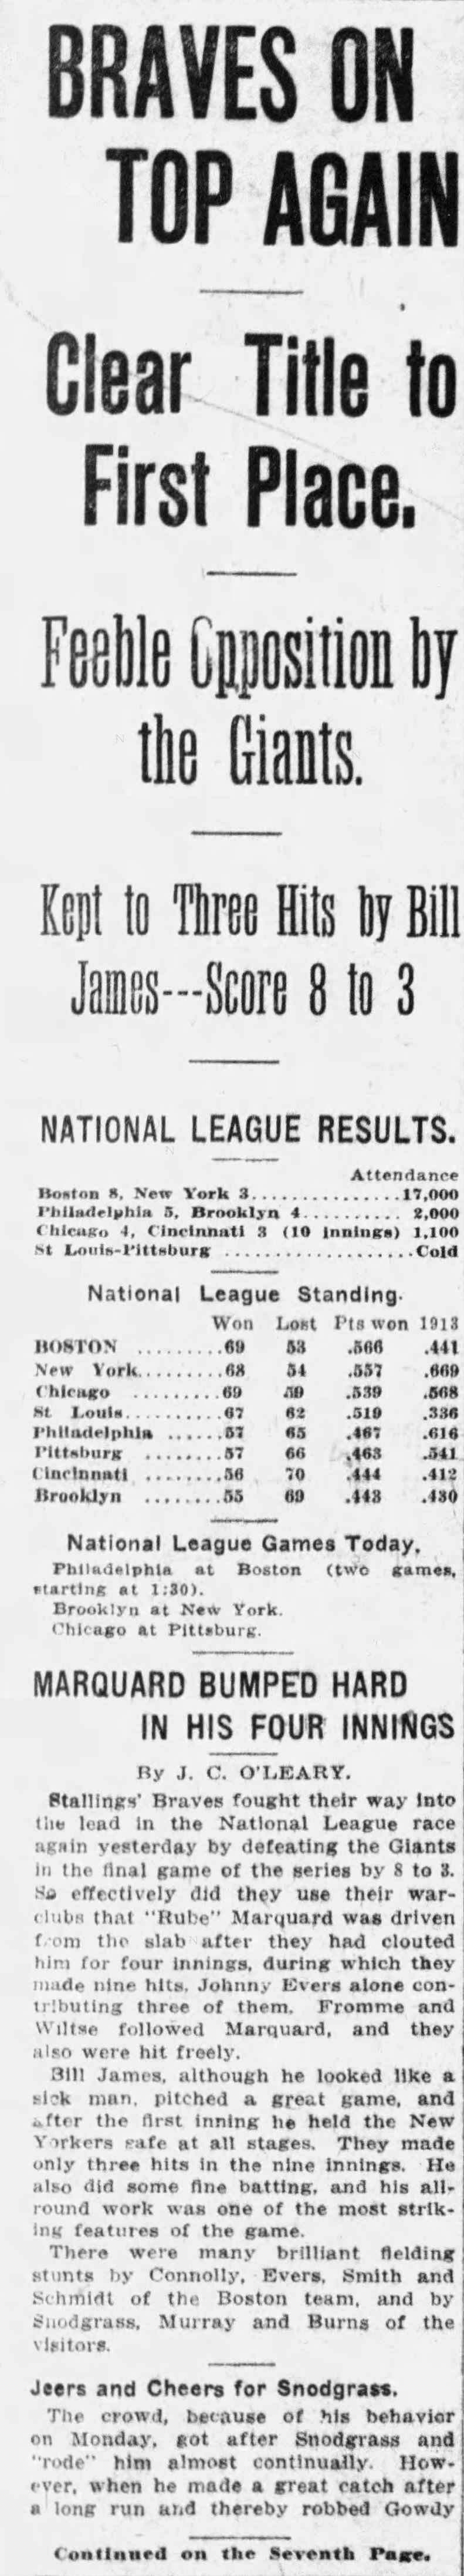 Braves beat Giants in September 1914 series to take NL lead